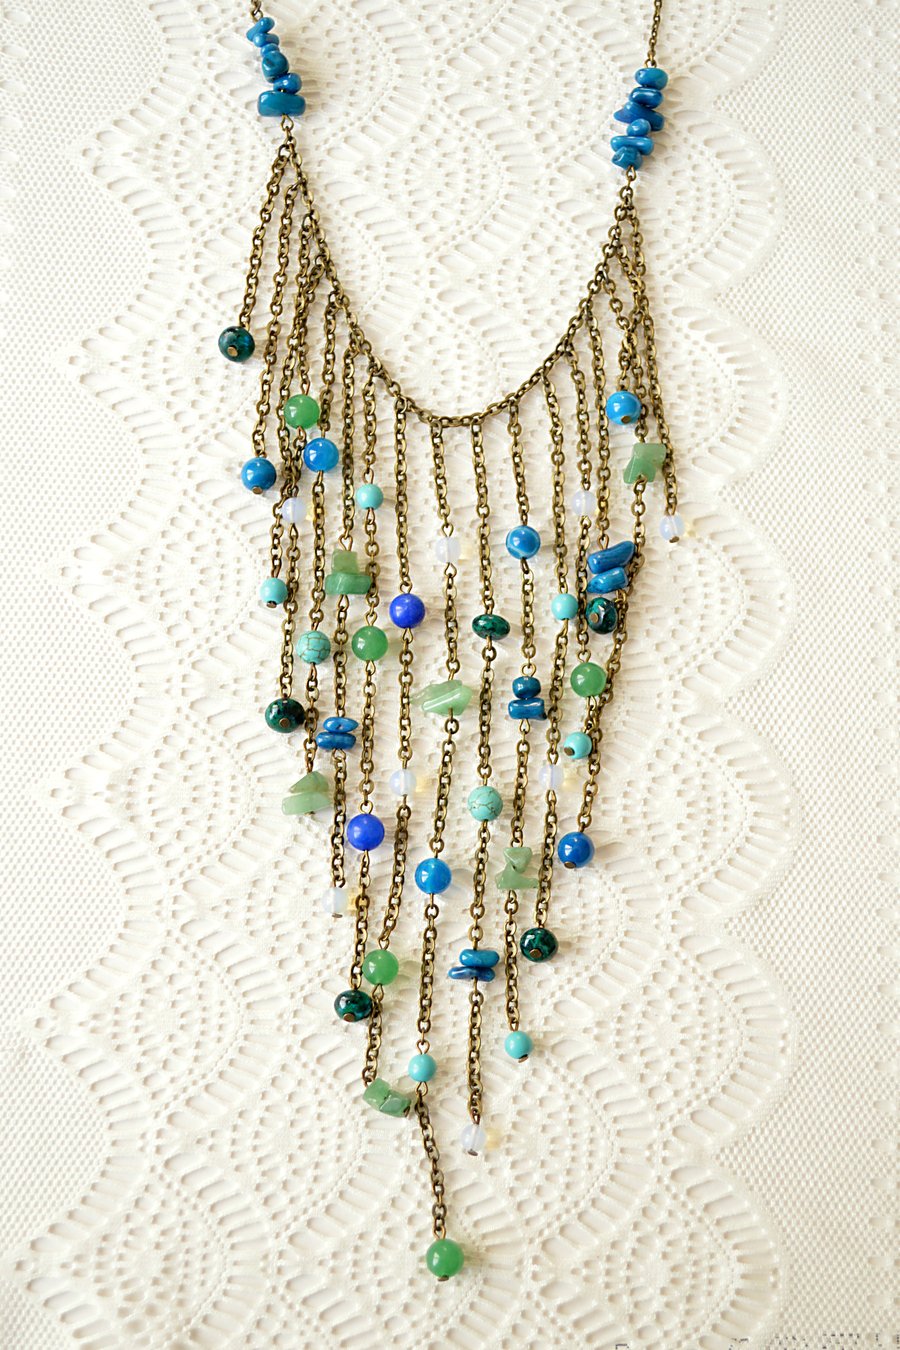 Statement Waterfall Necklace in Shades of Blue & Green 